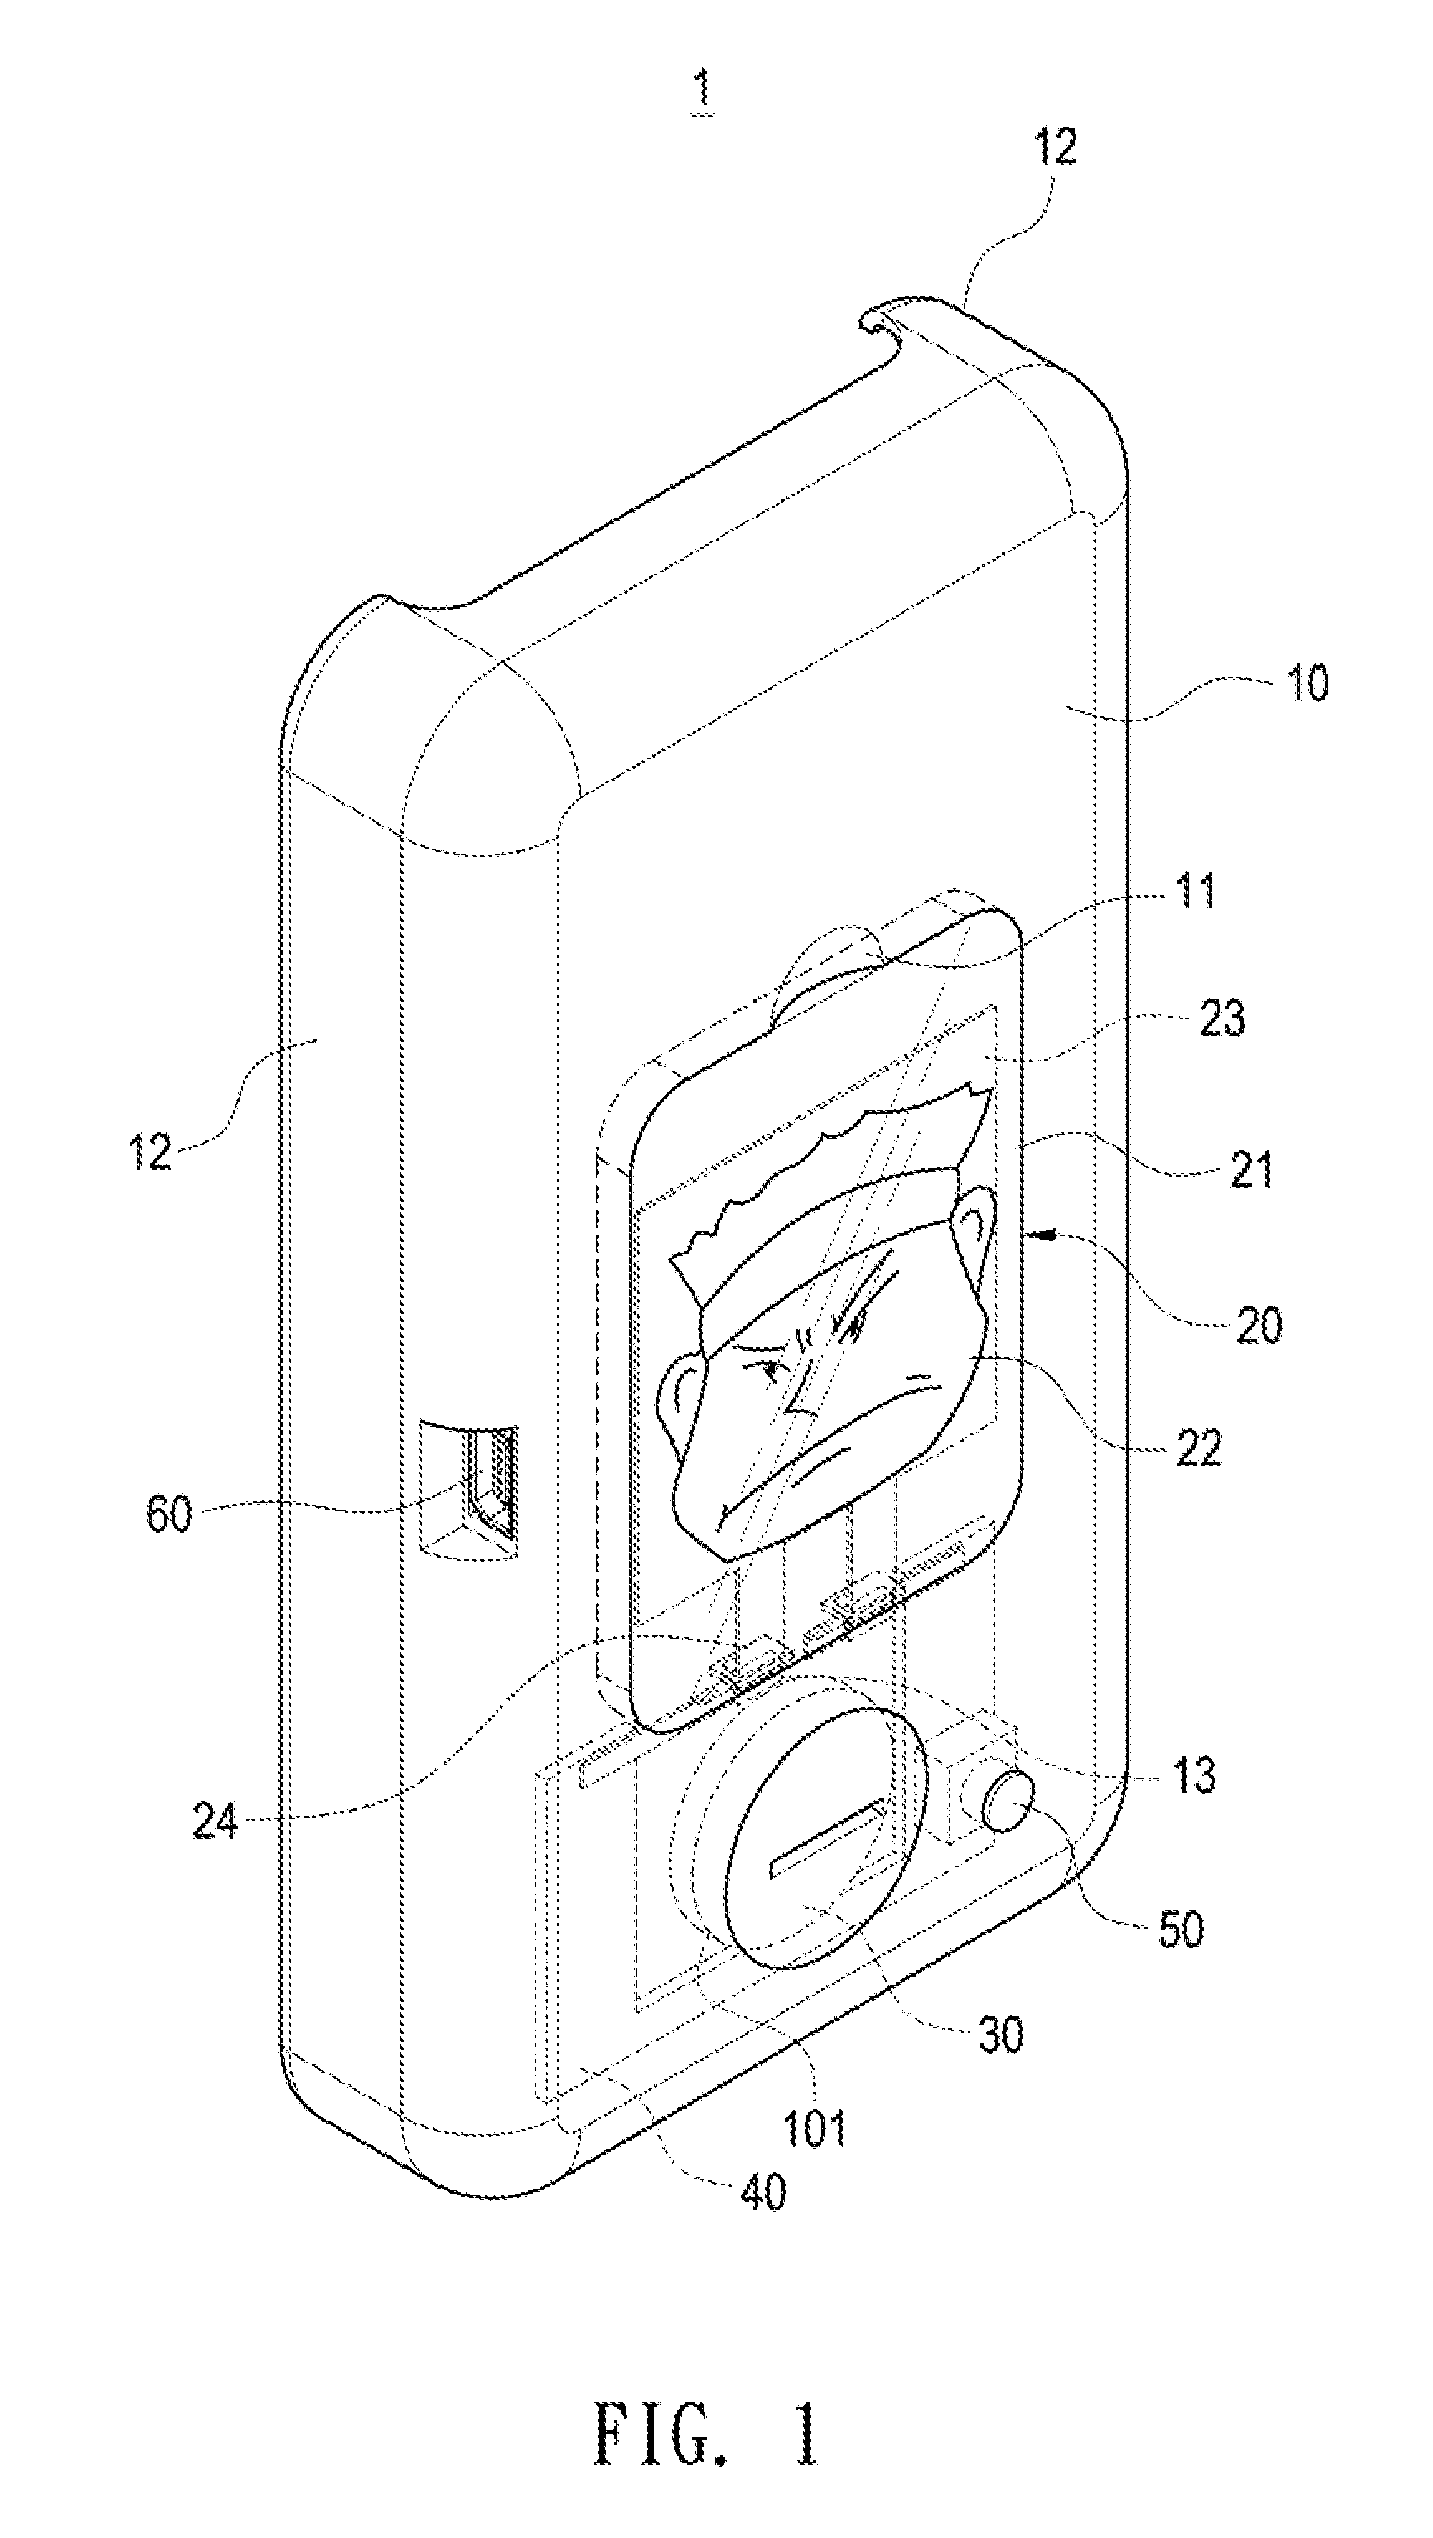 Graphic light module for use with portable device